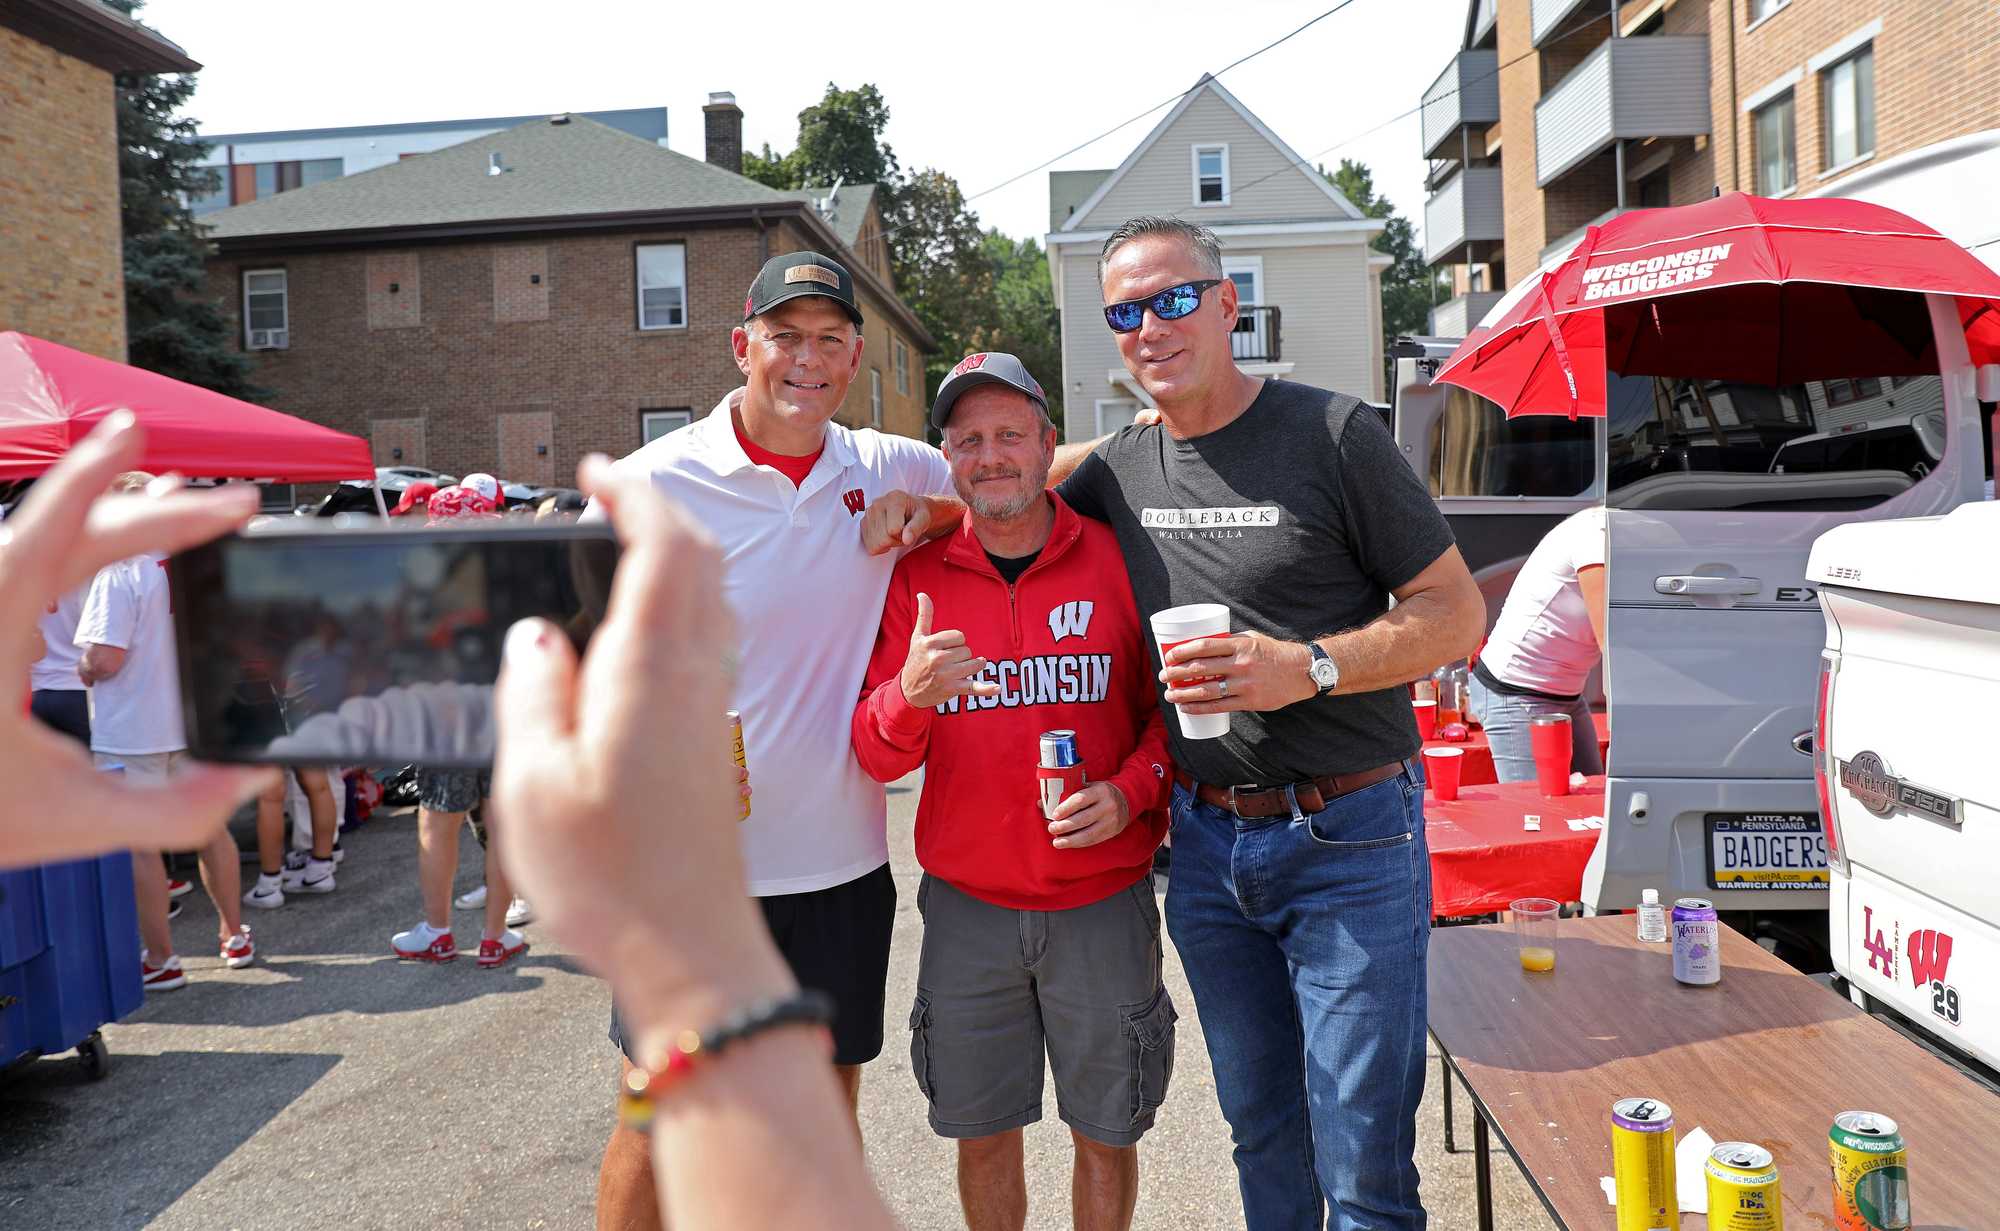 Former New England Patriots teammates Todd Rucci (left) and Drew Bledsoe (right) tailgated with Bruce Herbig of Kauai, Hawaii. Herbig's son, Nick, is an outside linebacker for Wisconsin. Bledsoe is a Washington State alum. 